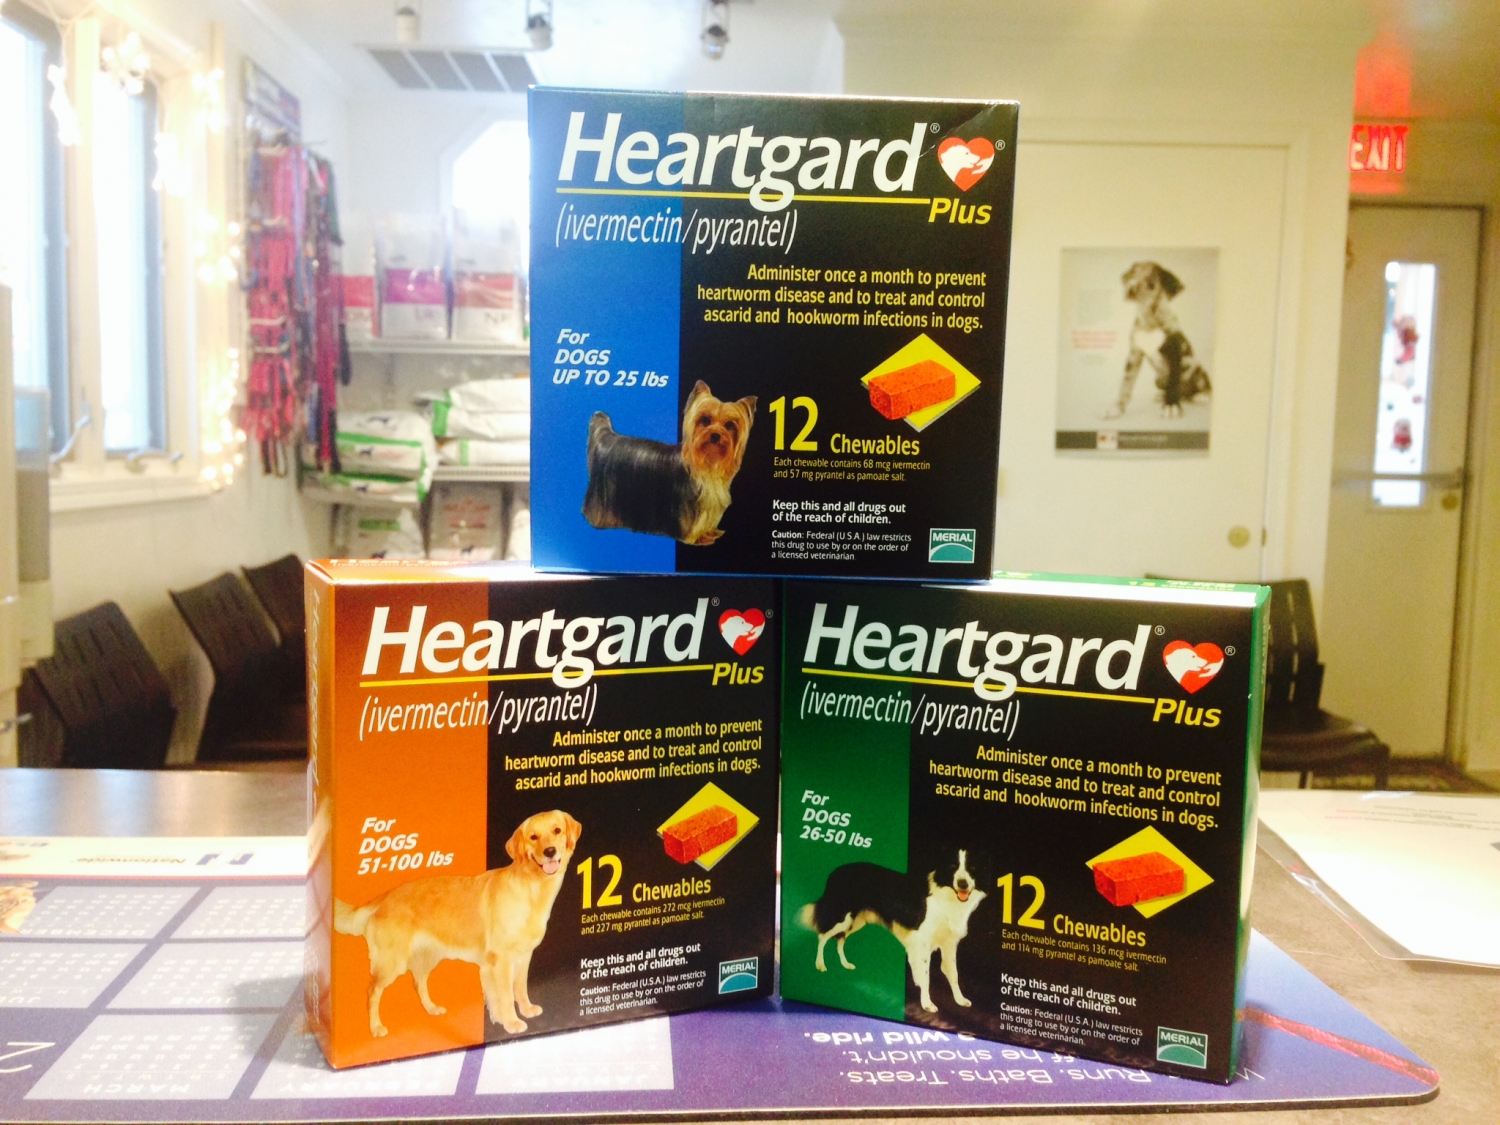 heartgard-recommendations